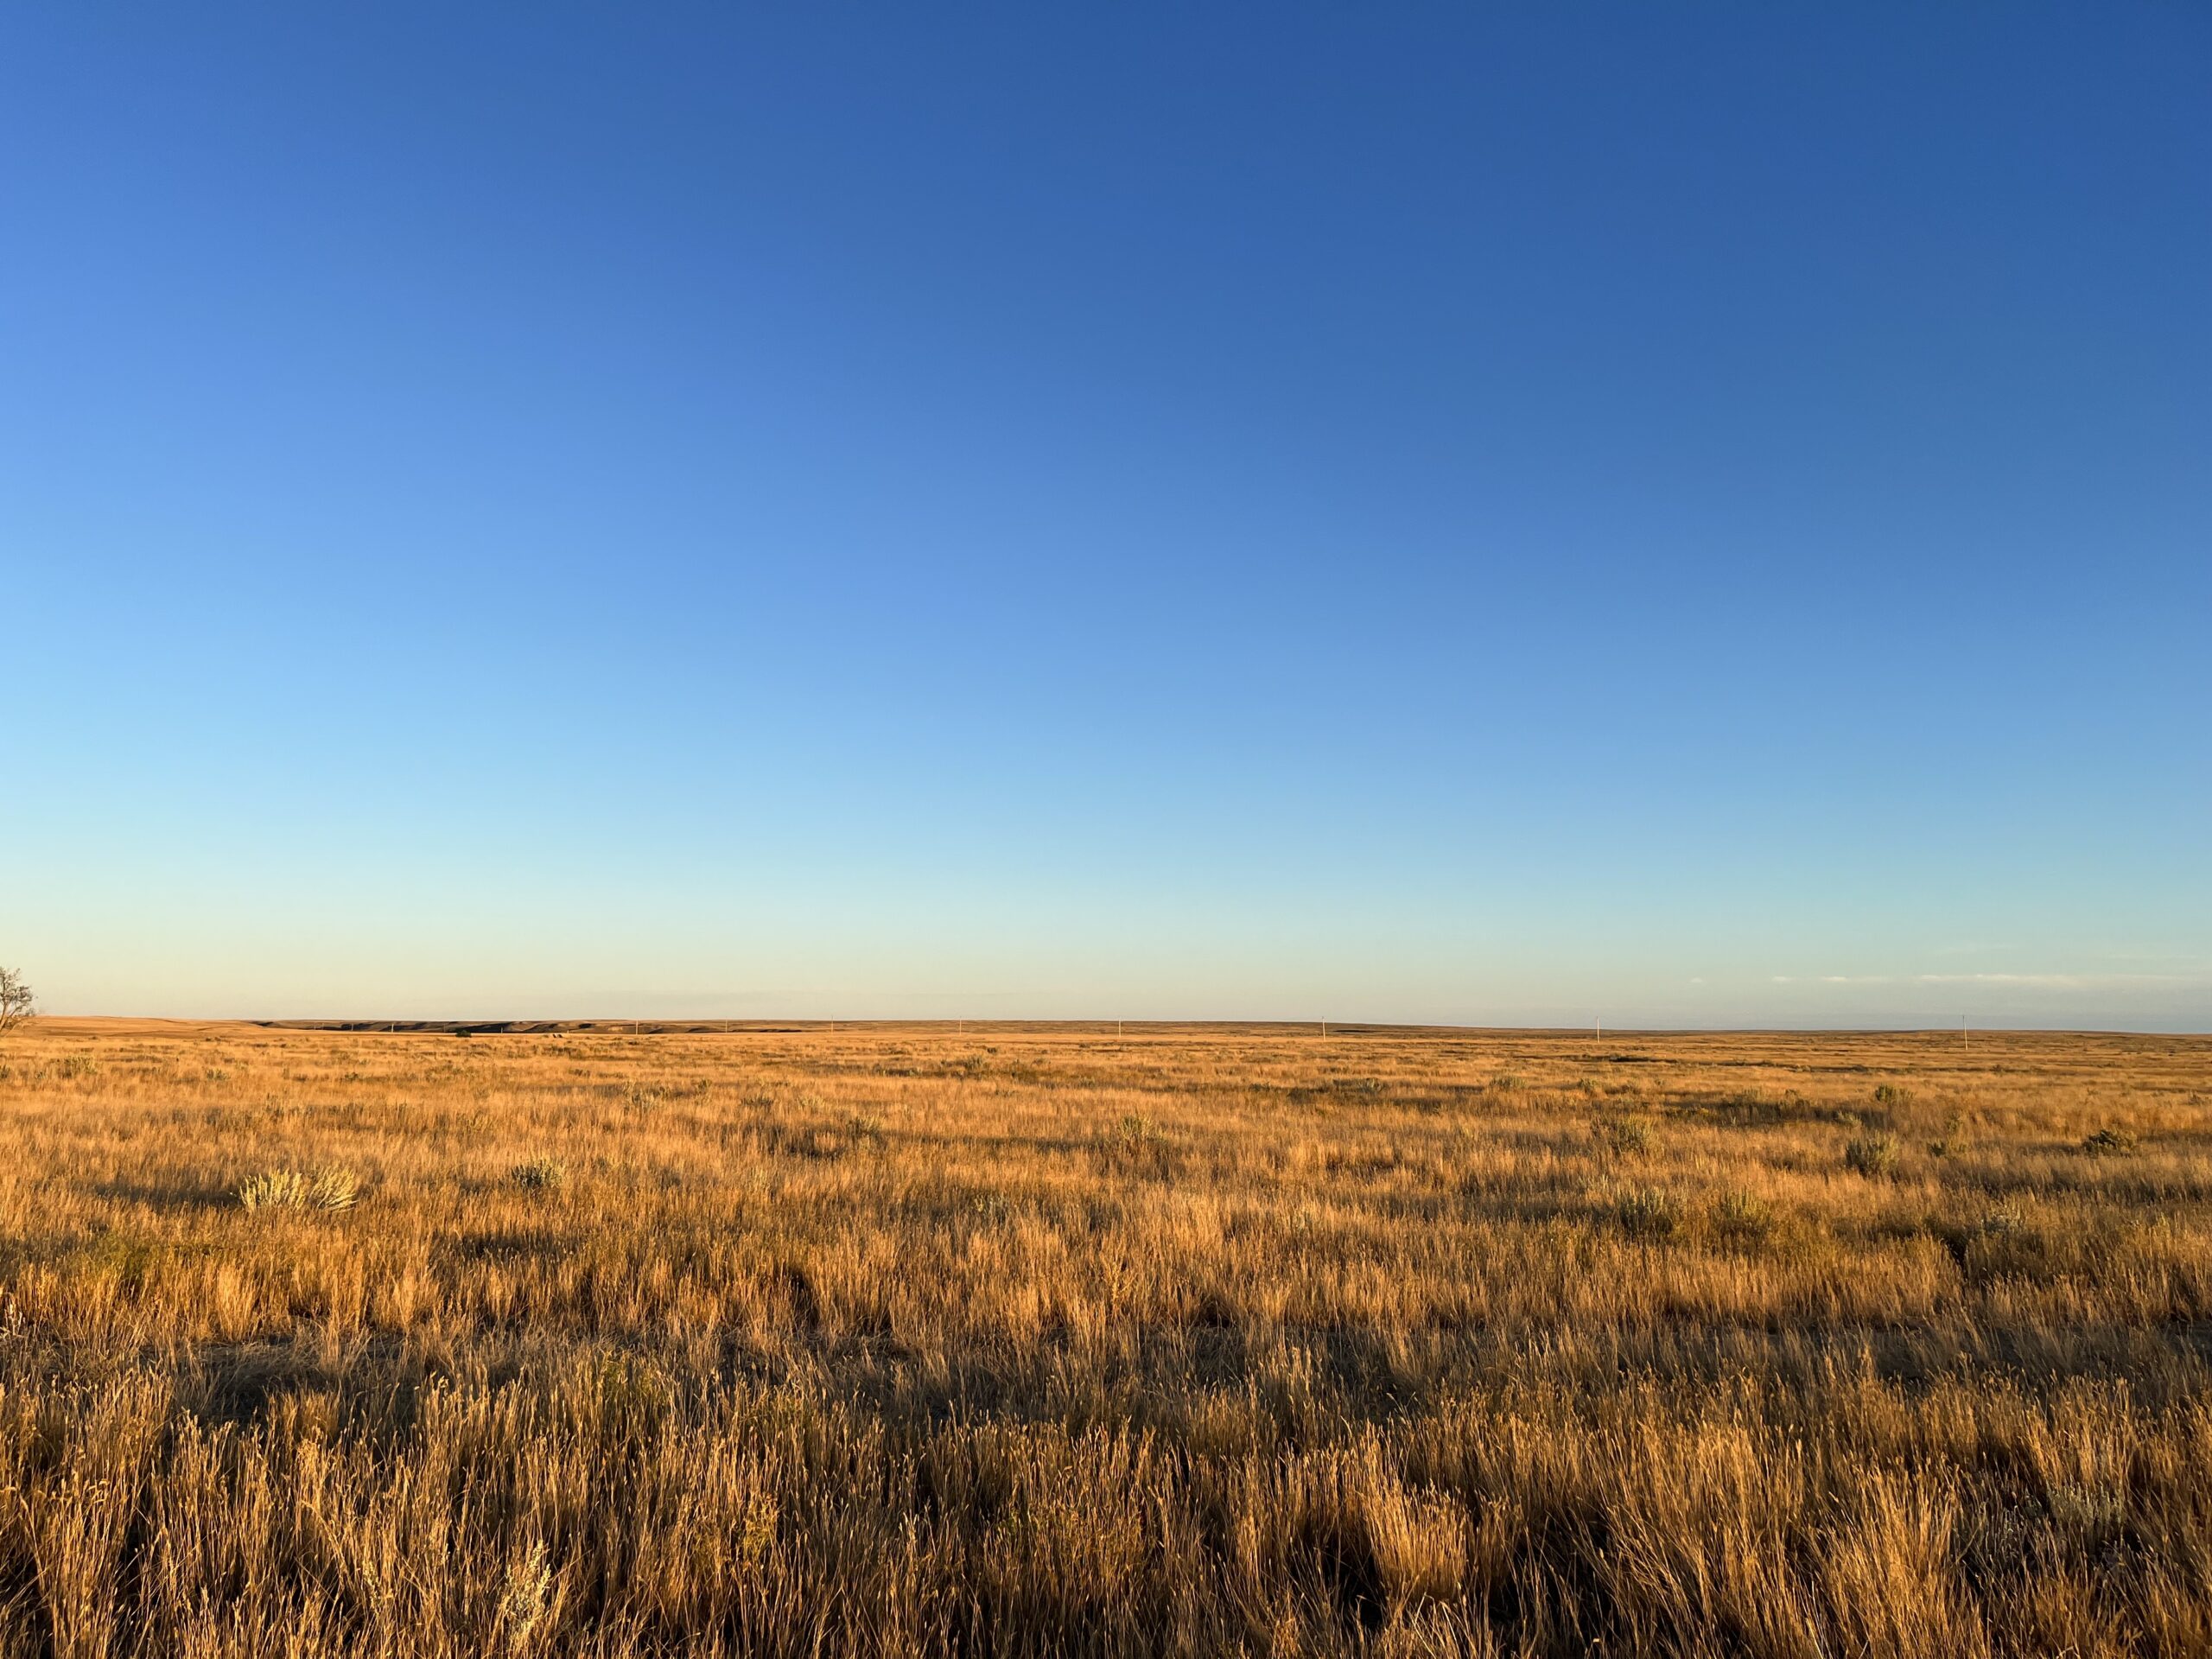 Image of a yellow and orange wheat field and intense blue sky.